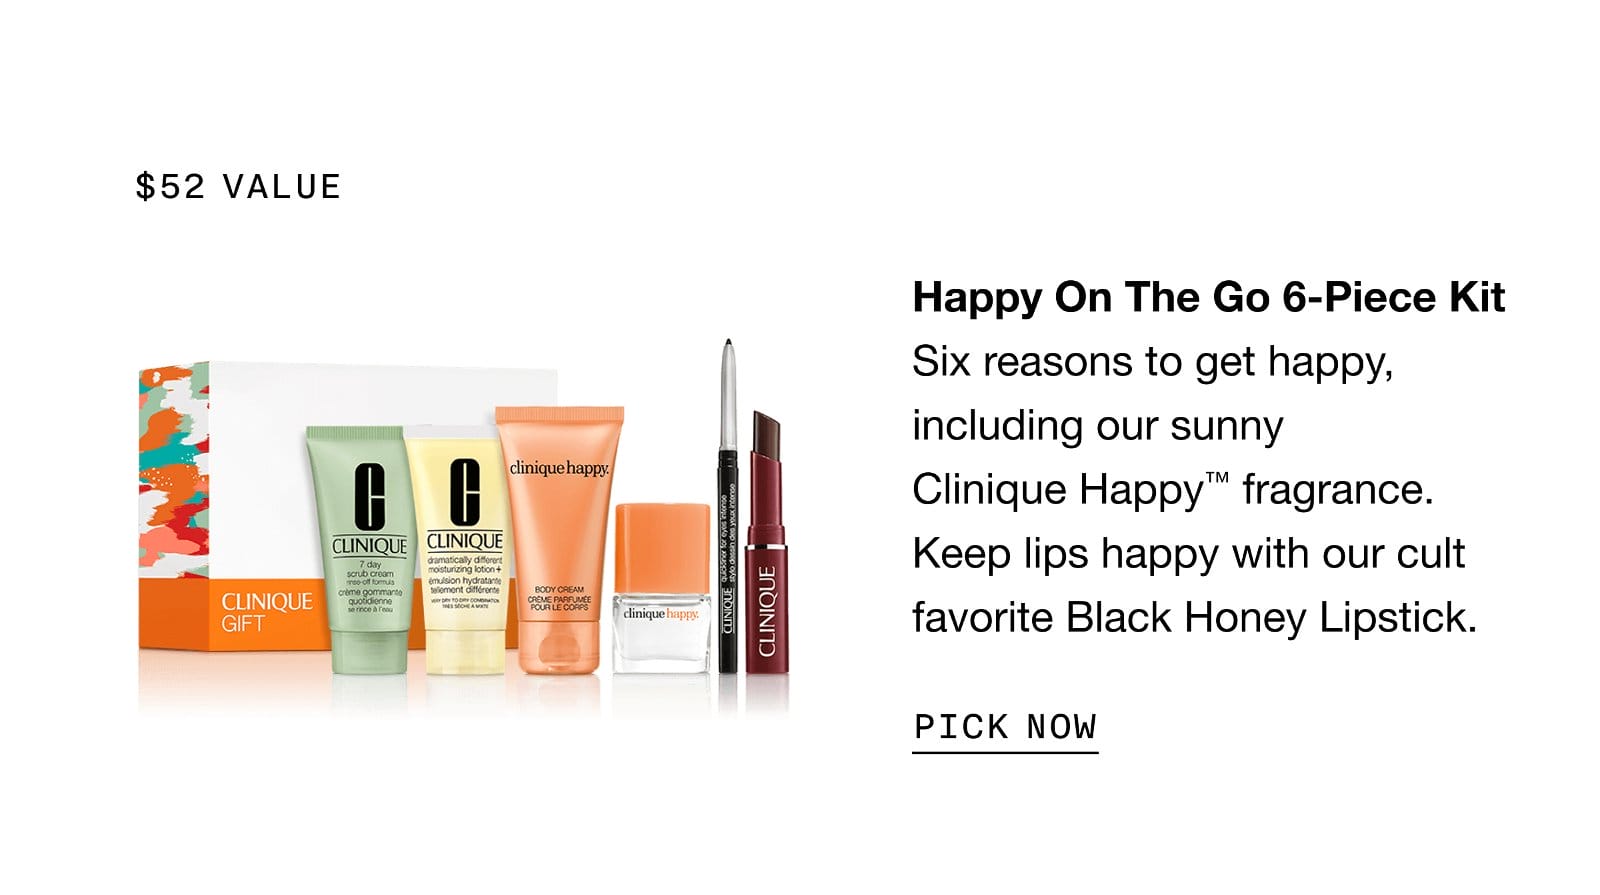 \\$52 value | Happy On The Go 6-Piece Kit Six reasons to get happy, including our sunny Clinique Happy™ fragrance. Keep lips happy with our cult favorite Black Honey Lipstick. | PICK NOW